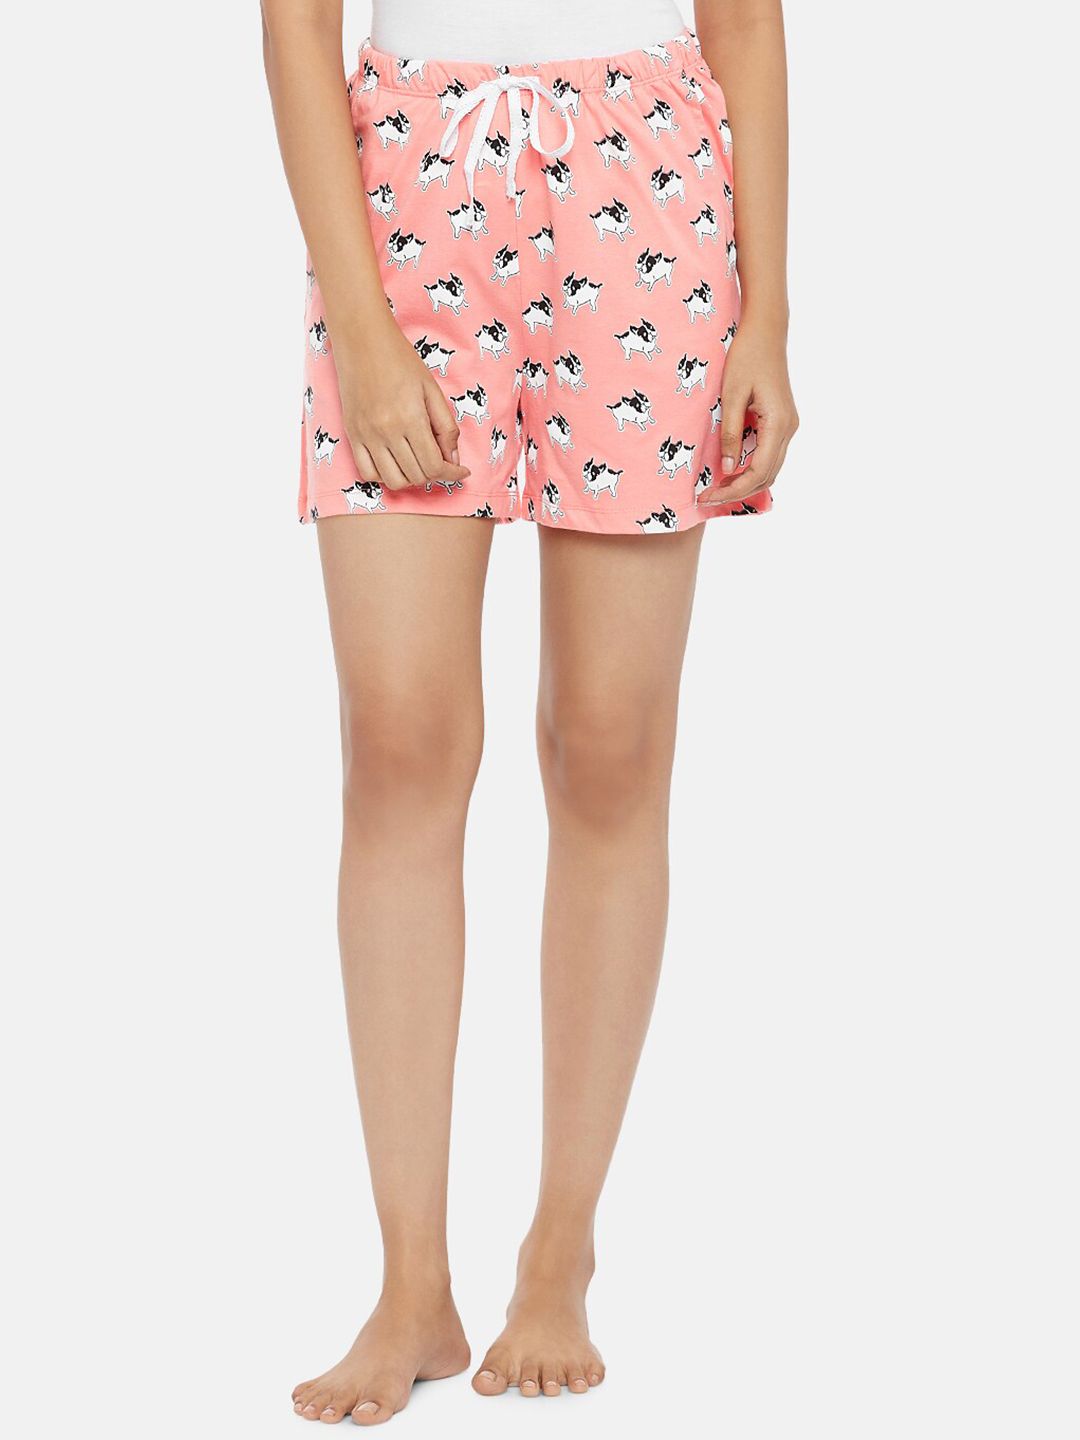 Dreamz by Pantaloons Women Pink & White Printed Cotton Lounge Shorts Price in India